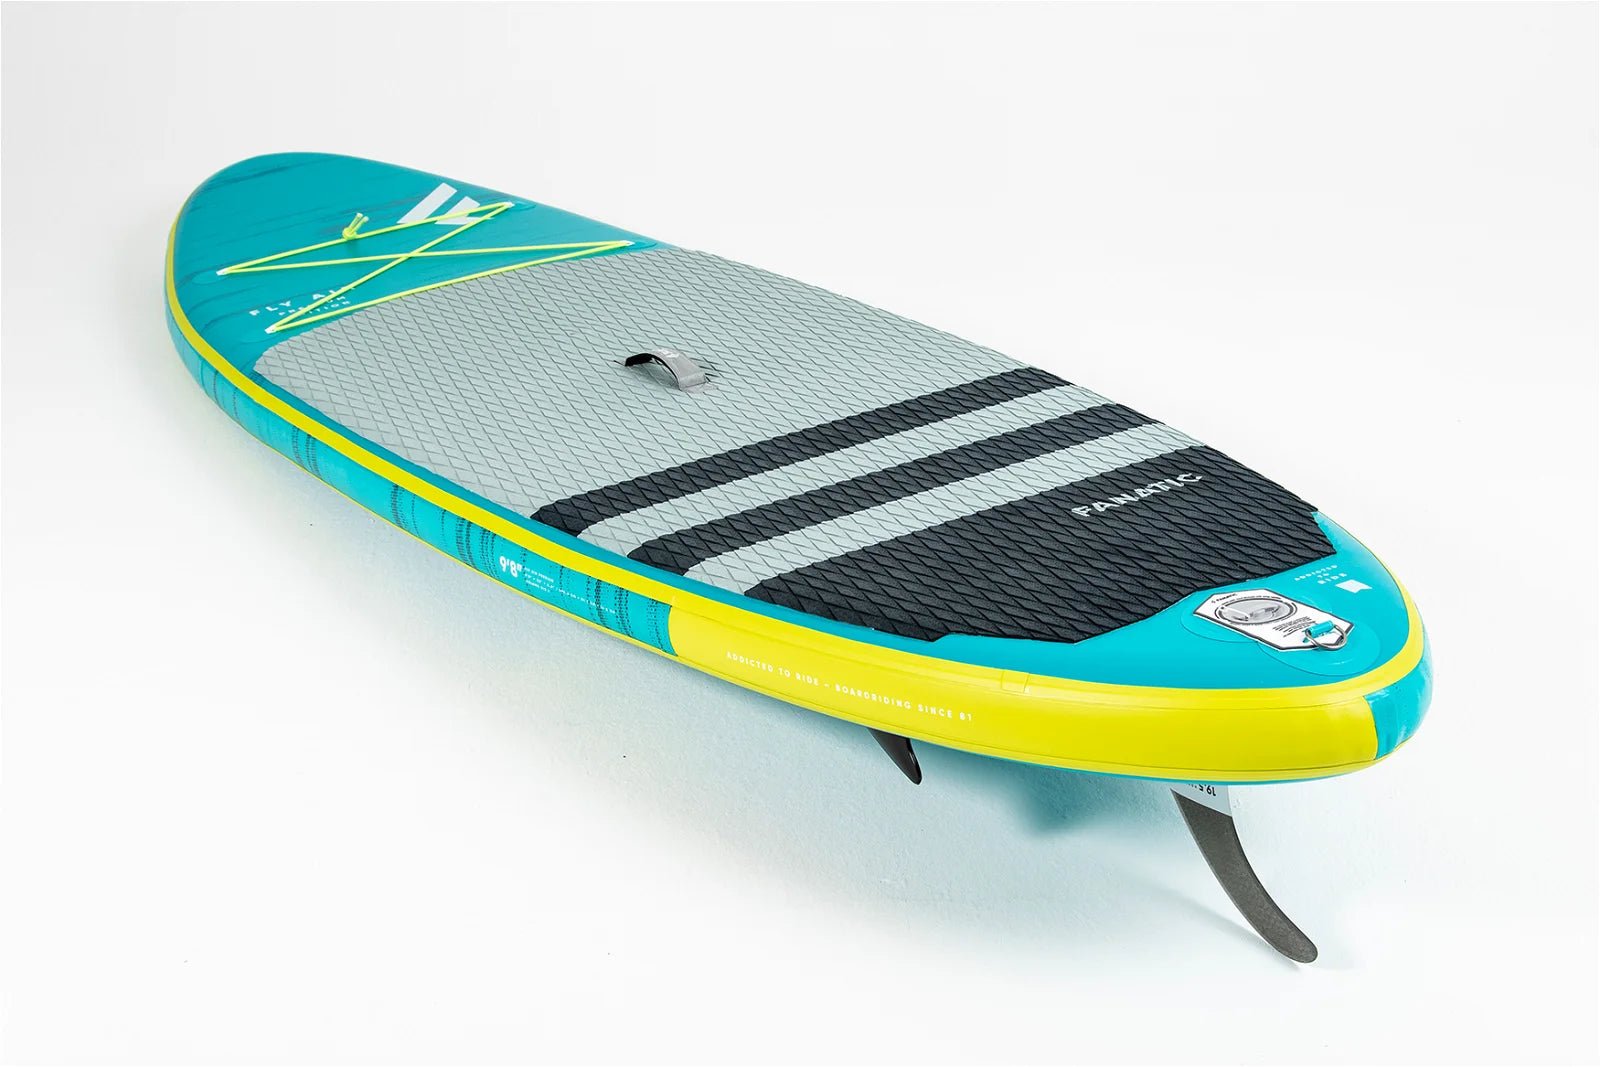 Fanatic Package Fly Air Premium/C35 2022 iSUP Paddleboard - Worthing Watersports - 9008415938421 - iSUP Packages - Fanatic SUP